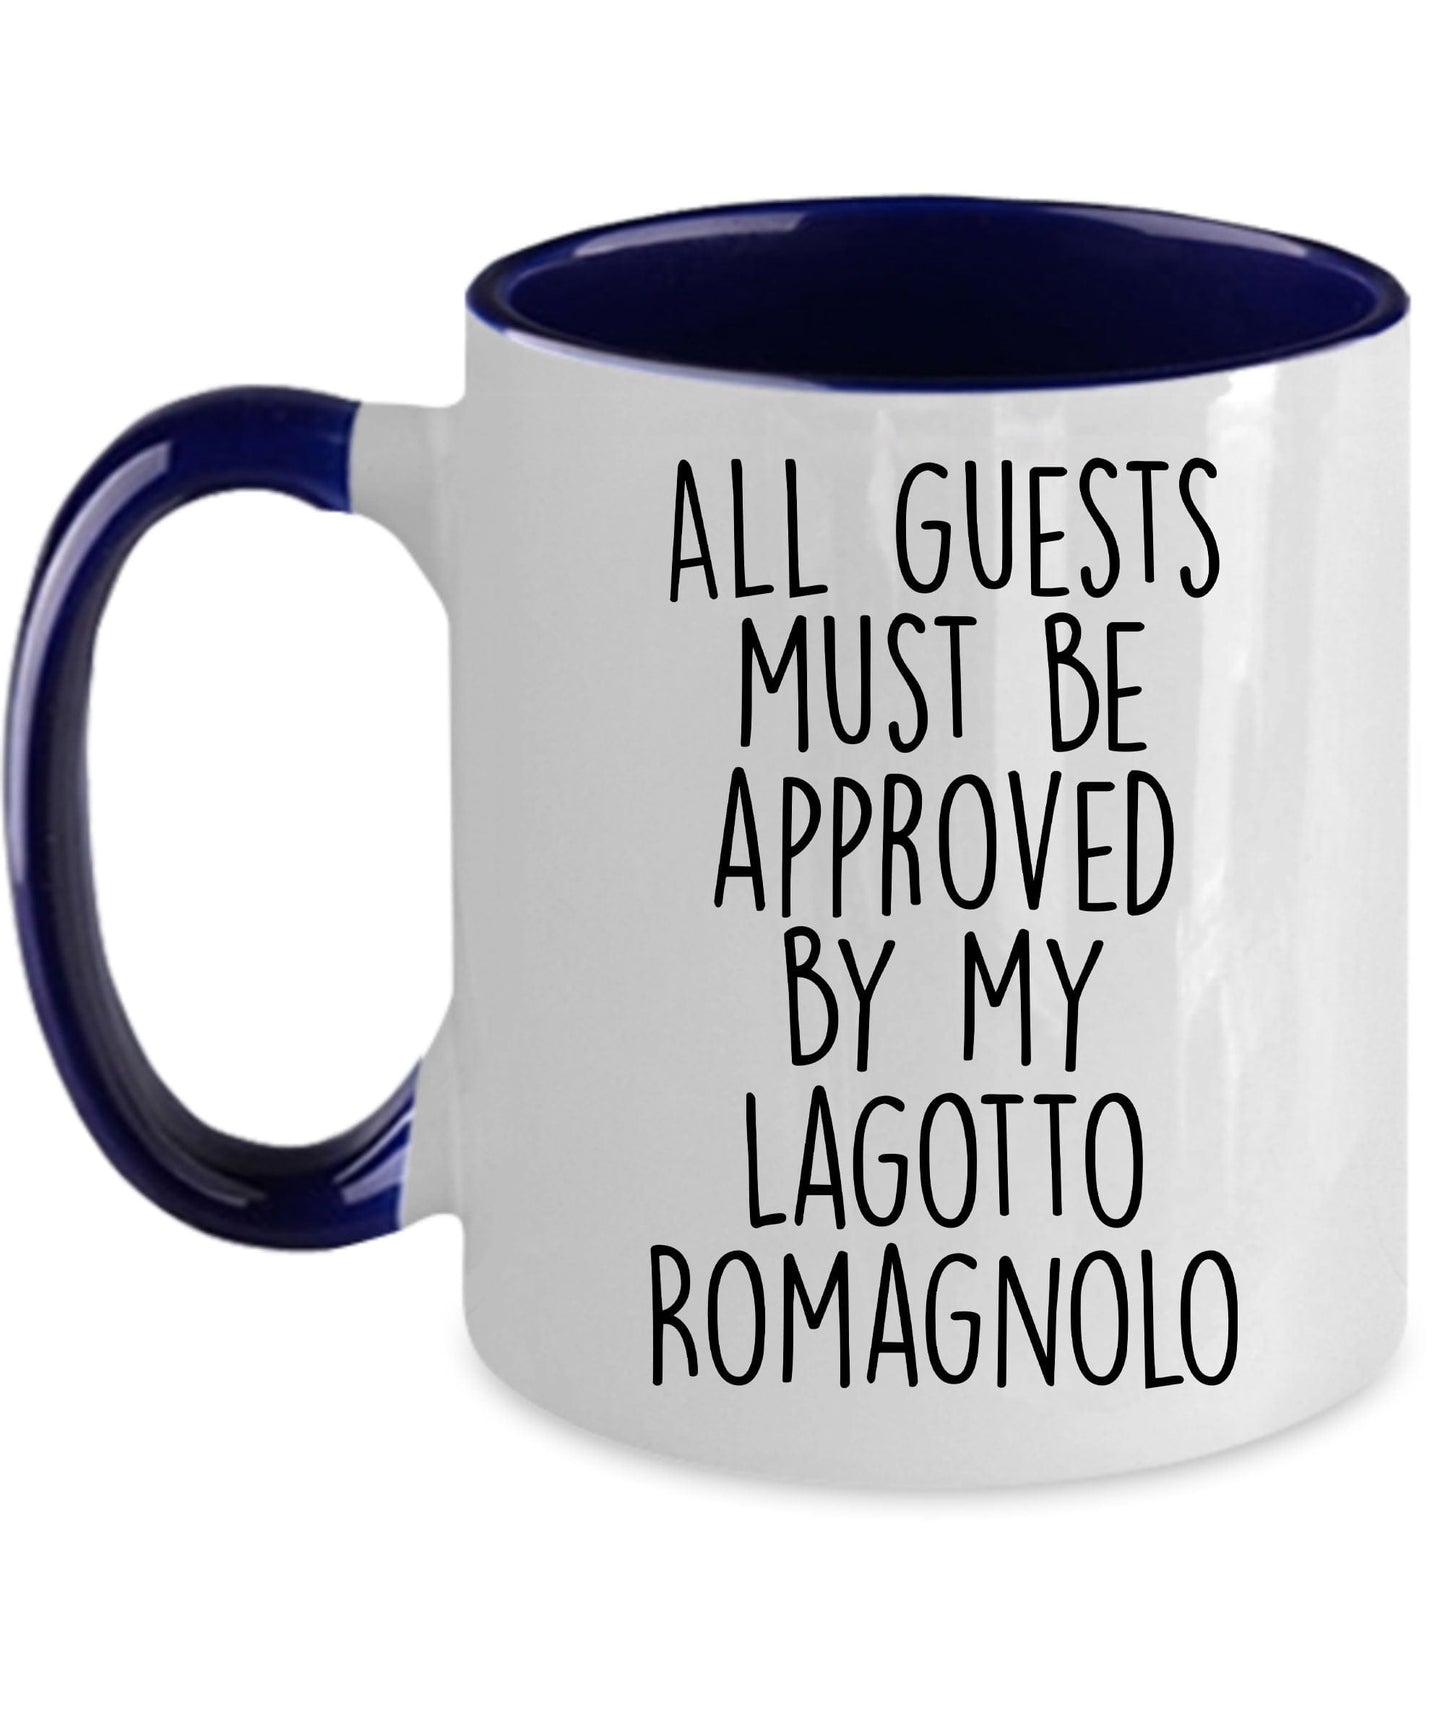 Lagotto Romagnolo funny dog lover ceramic coffee mug - All guests must be approved by the Lagotto Romagnolo